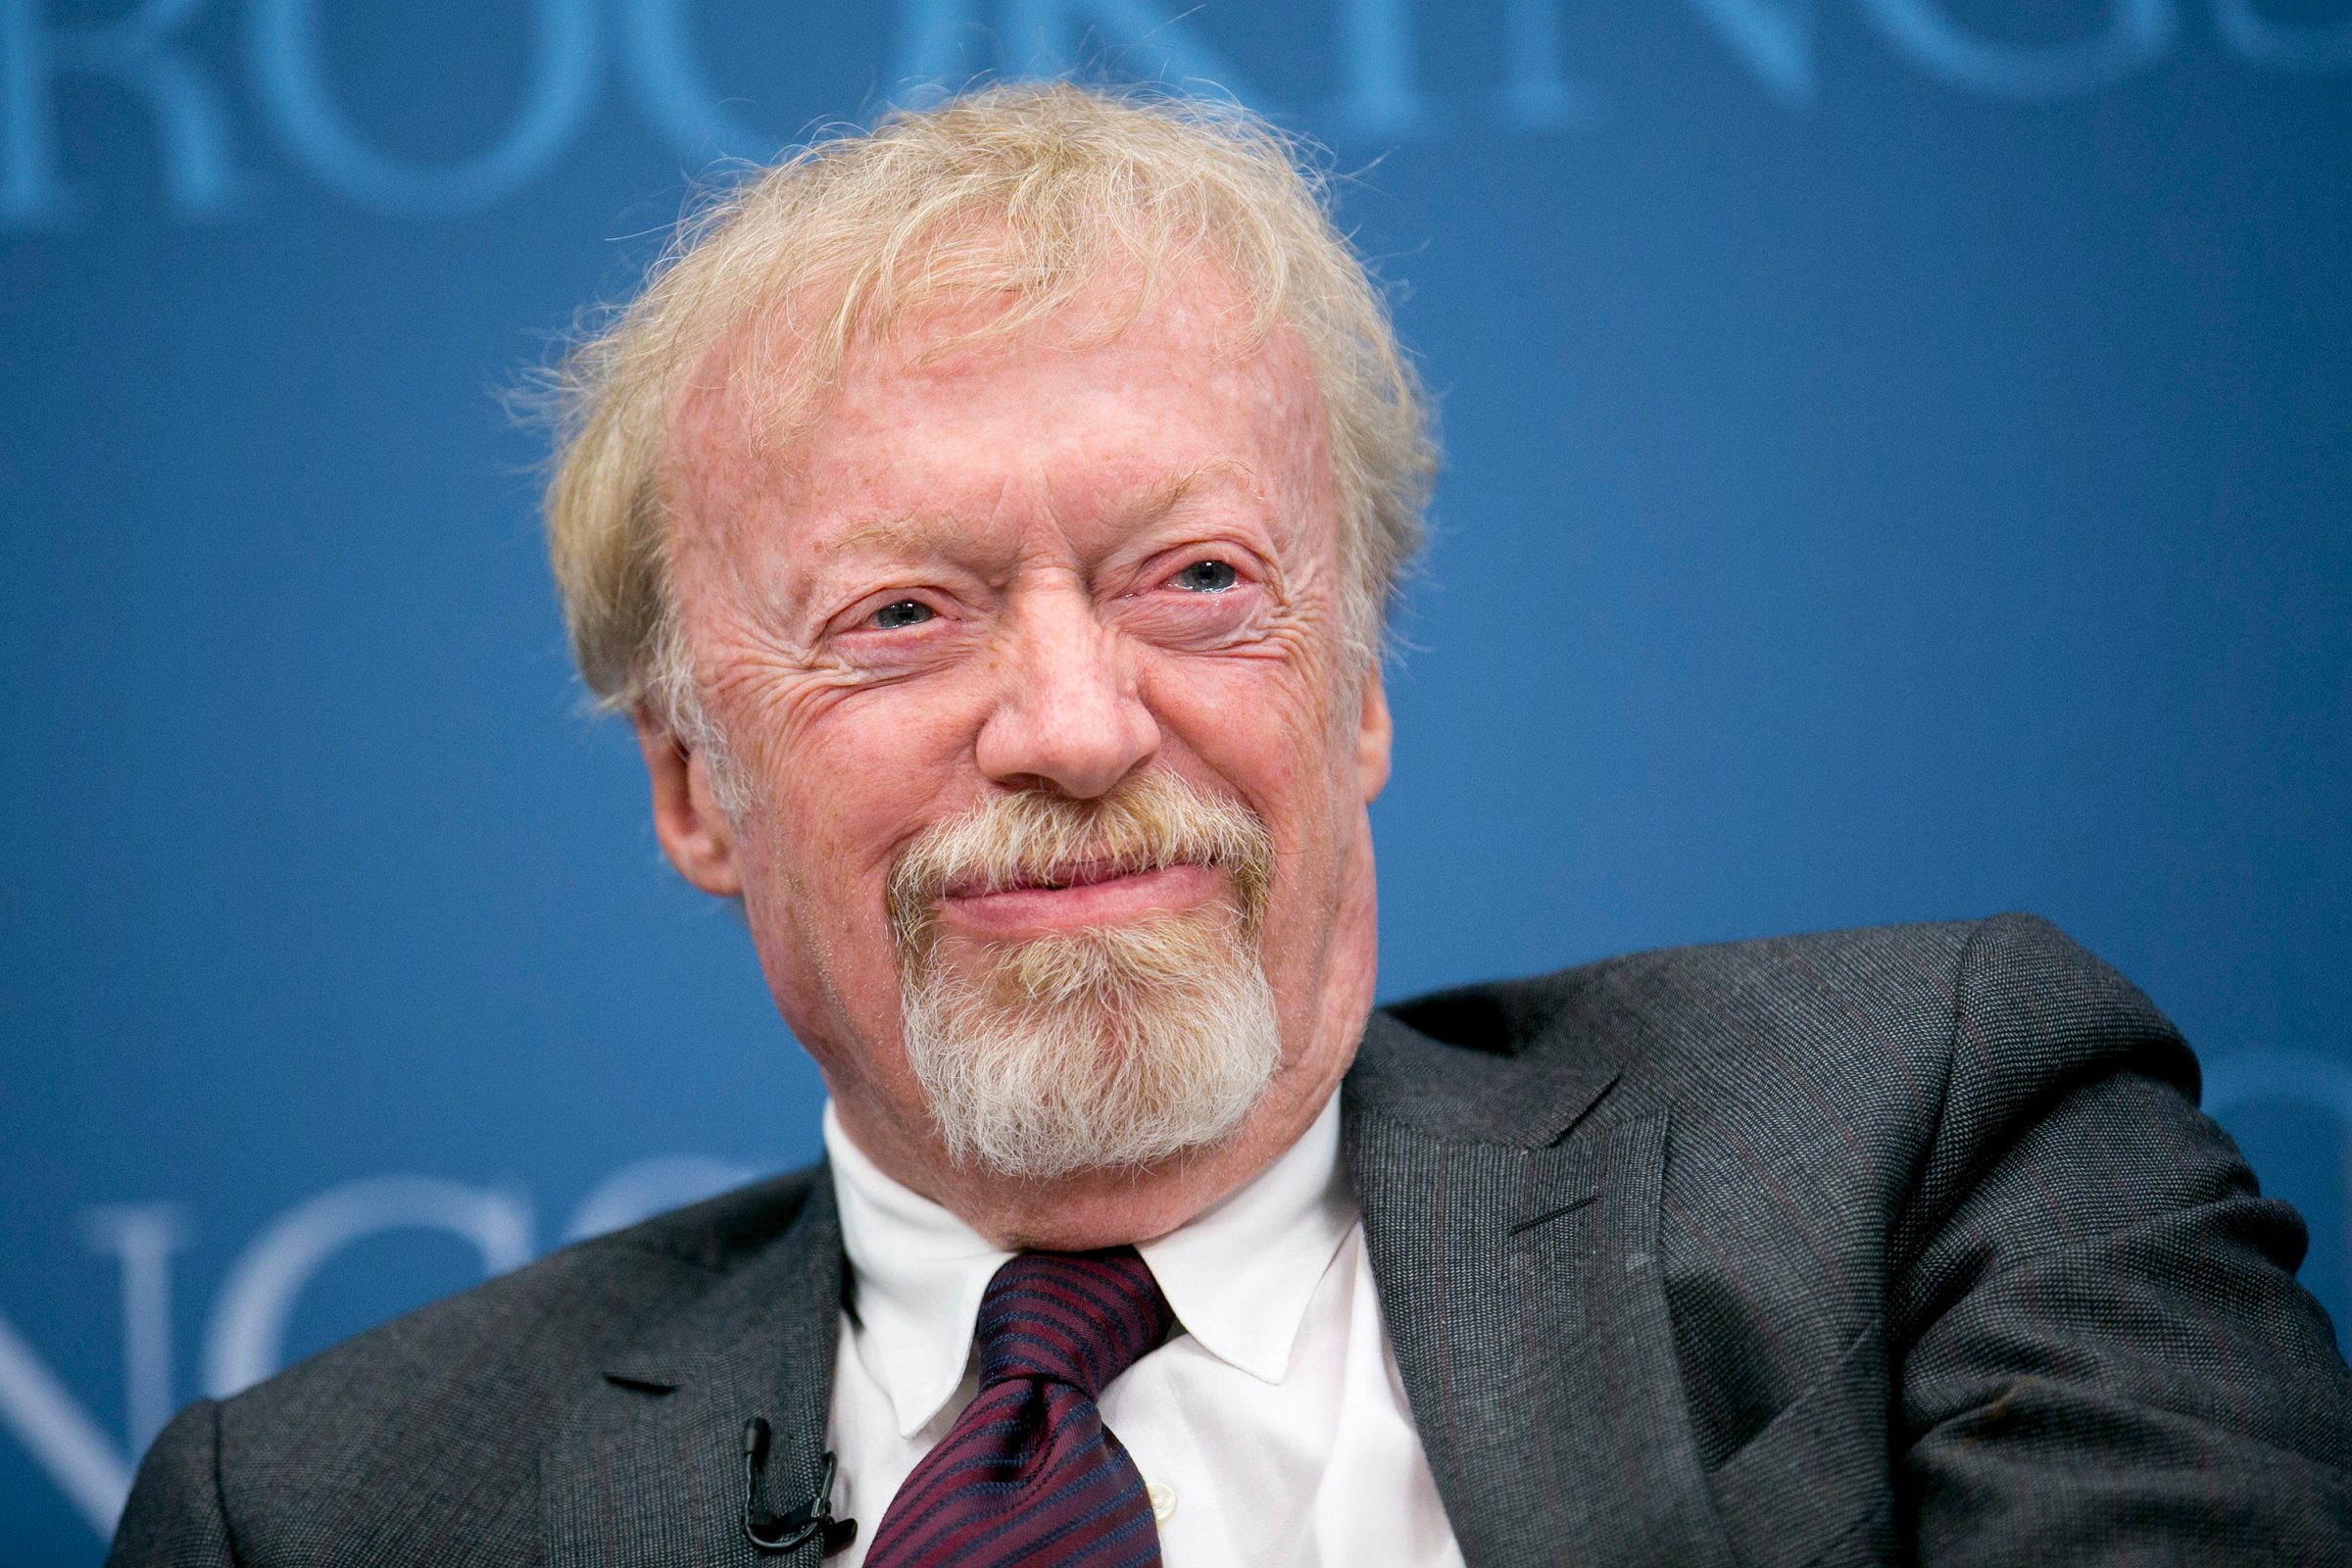 Phil Knight, chairman and co-founder of Nike Inc., laughs during a panel discussion at the Brookings Institution in Washington, D.C., U.S., on Tuesday, Jan. 15, 2013.